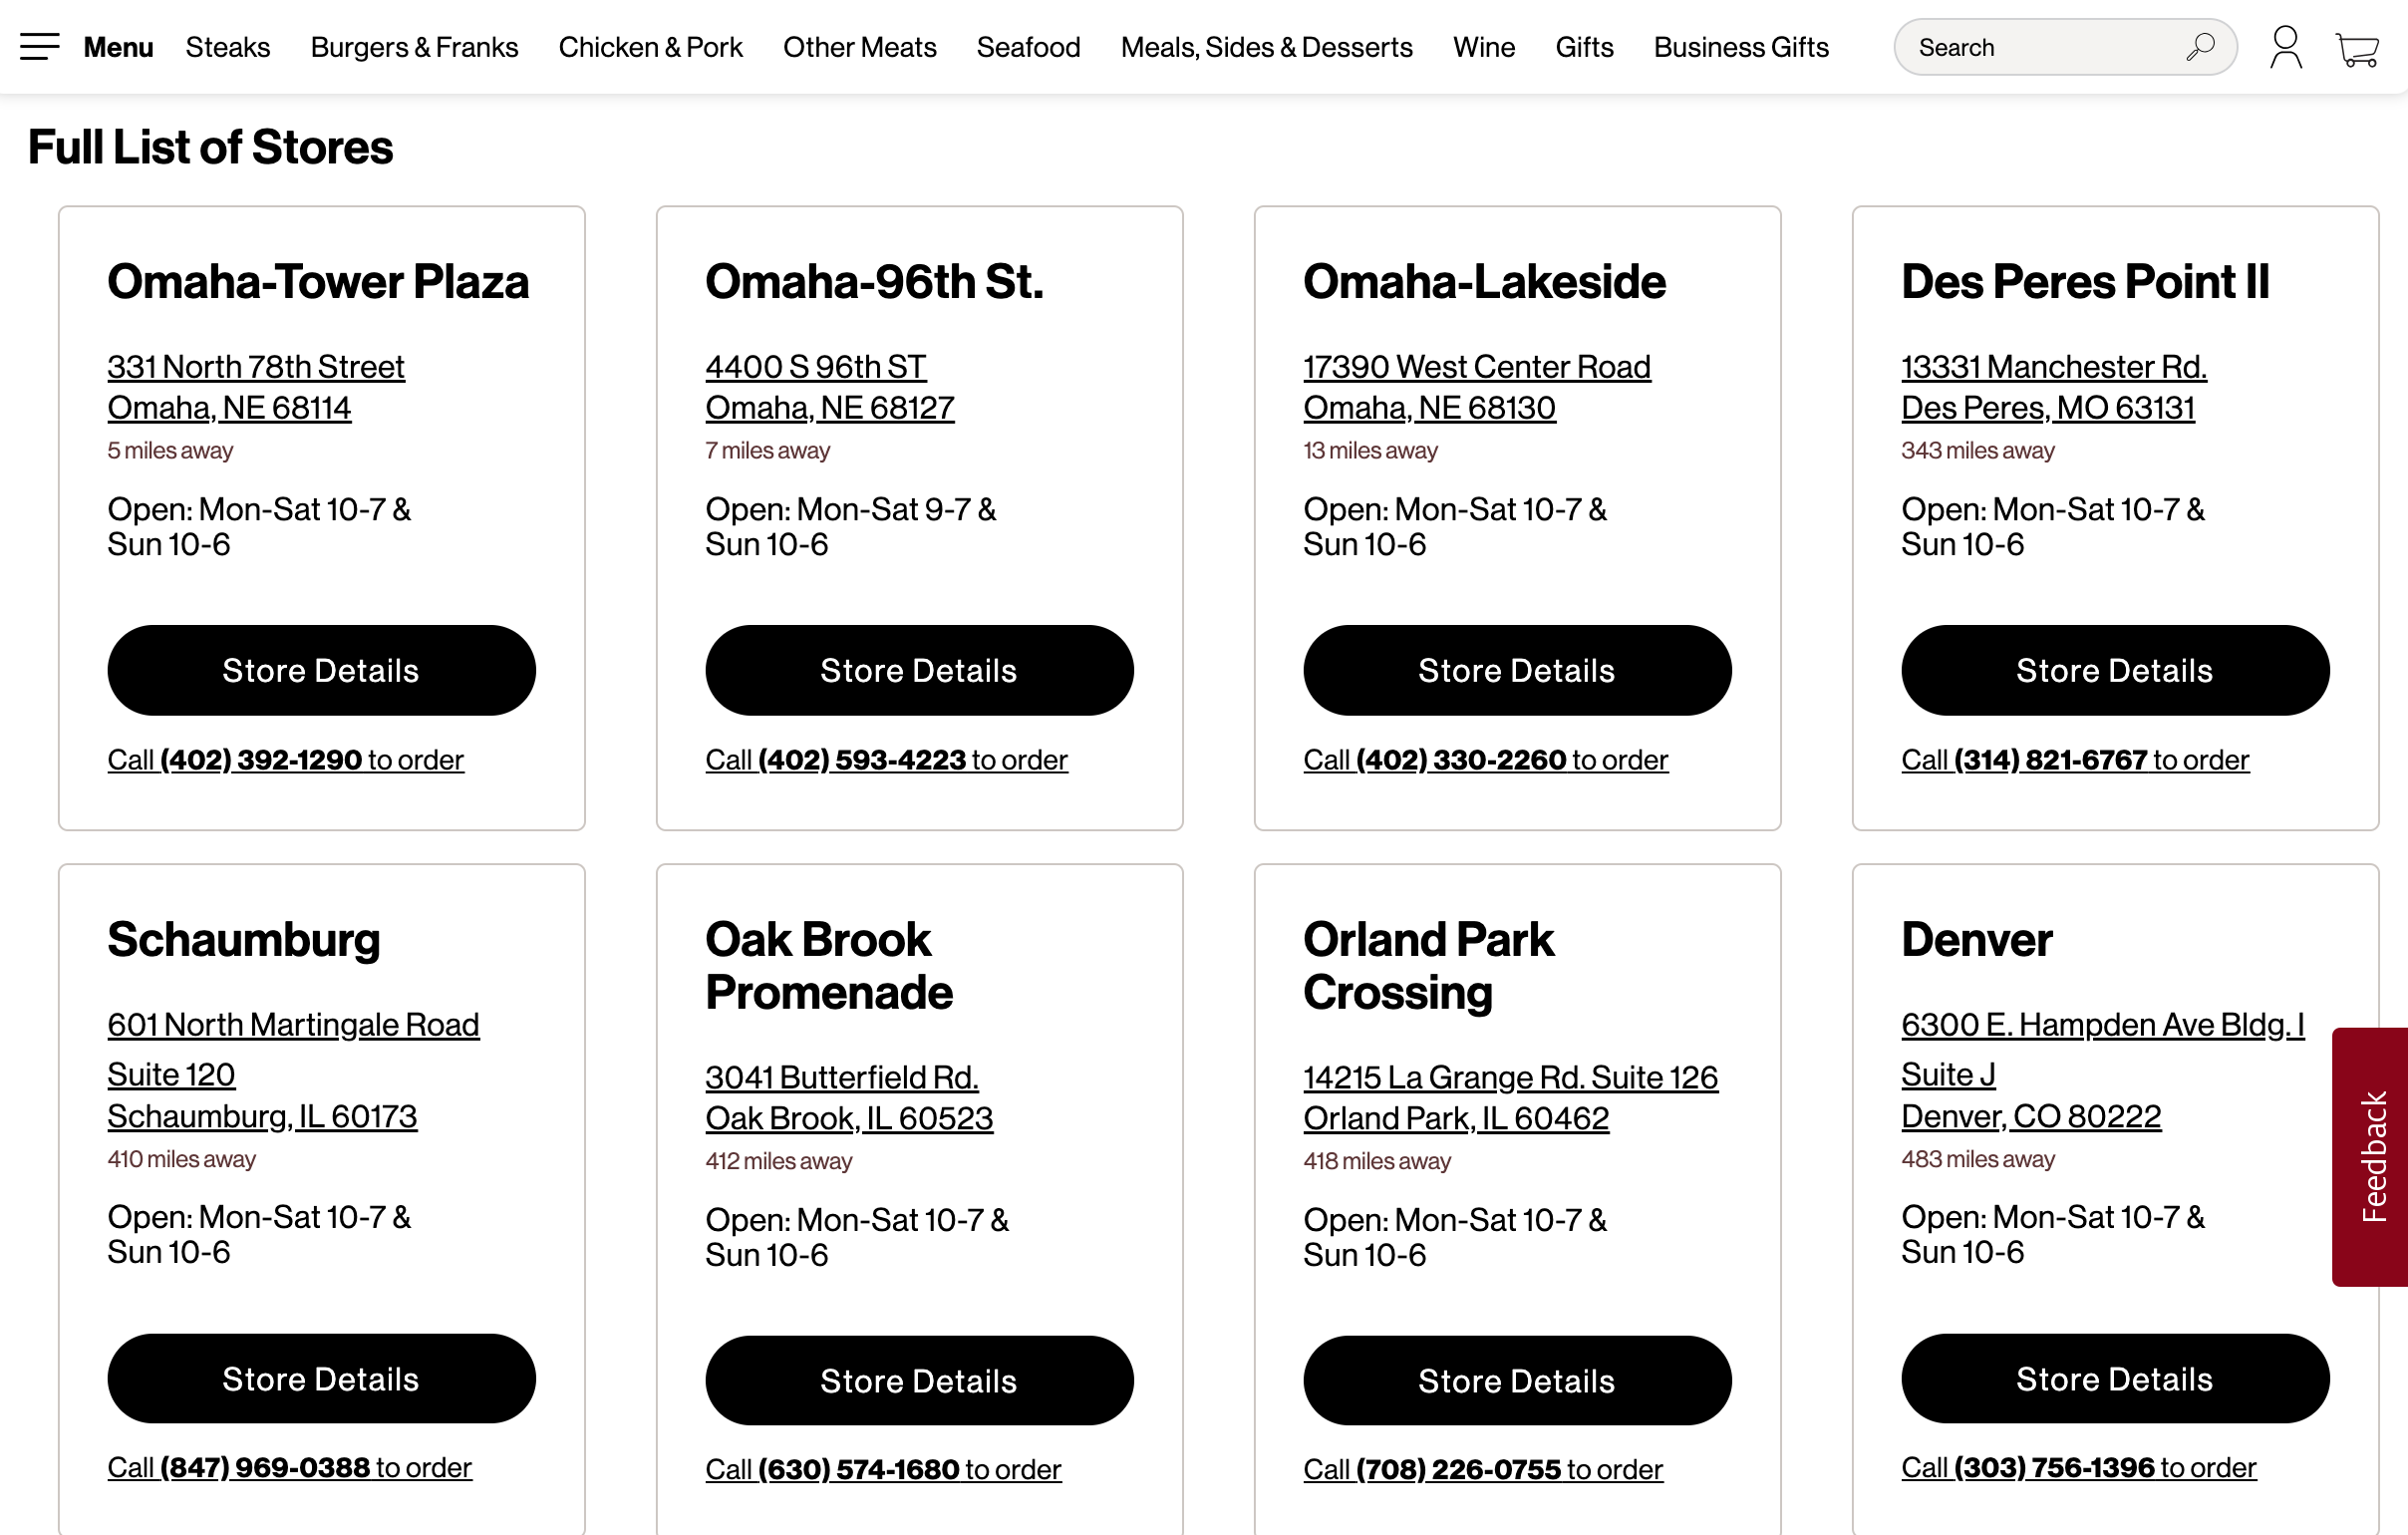 The "Full List of Stores" page on the Omaha Steaks website with different store locations and store details featured